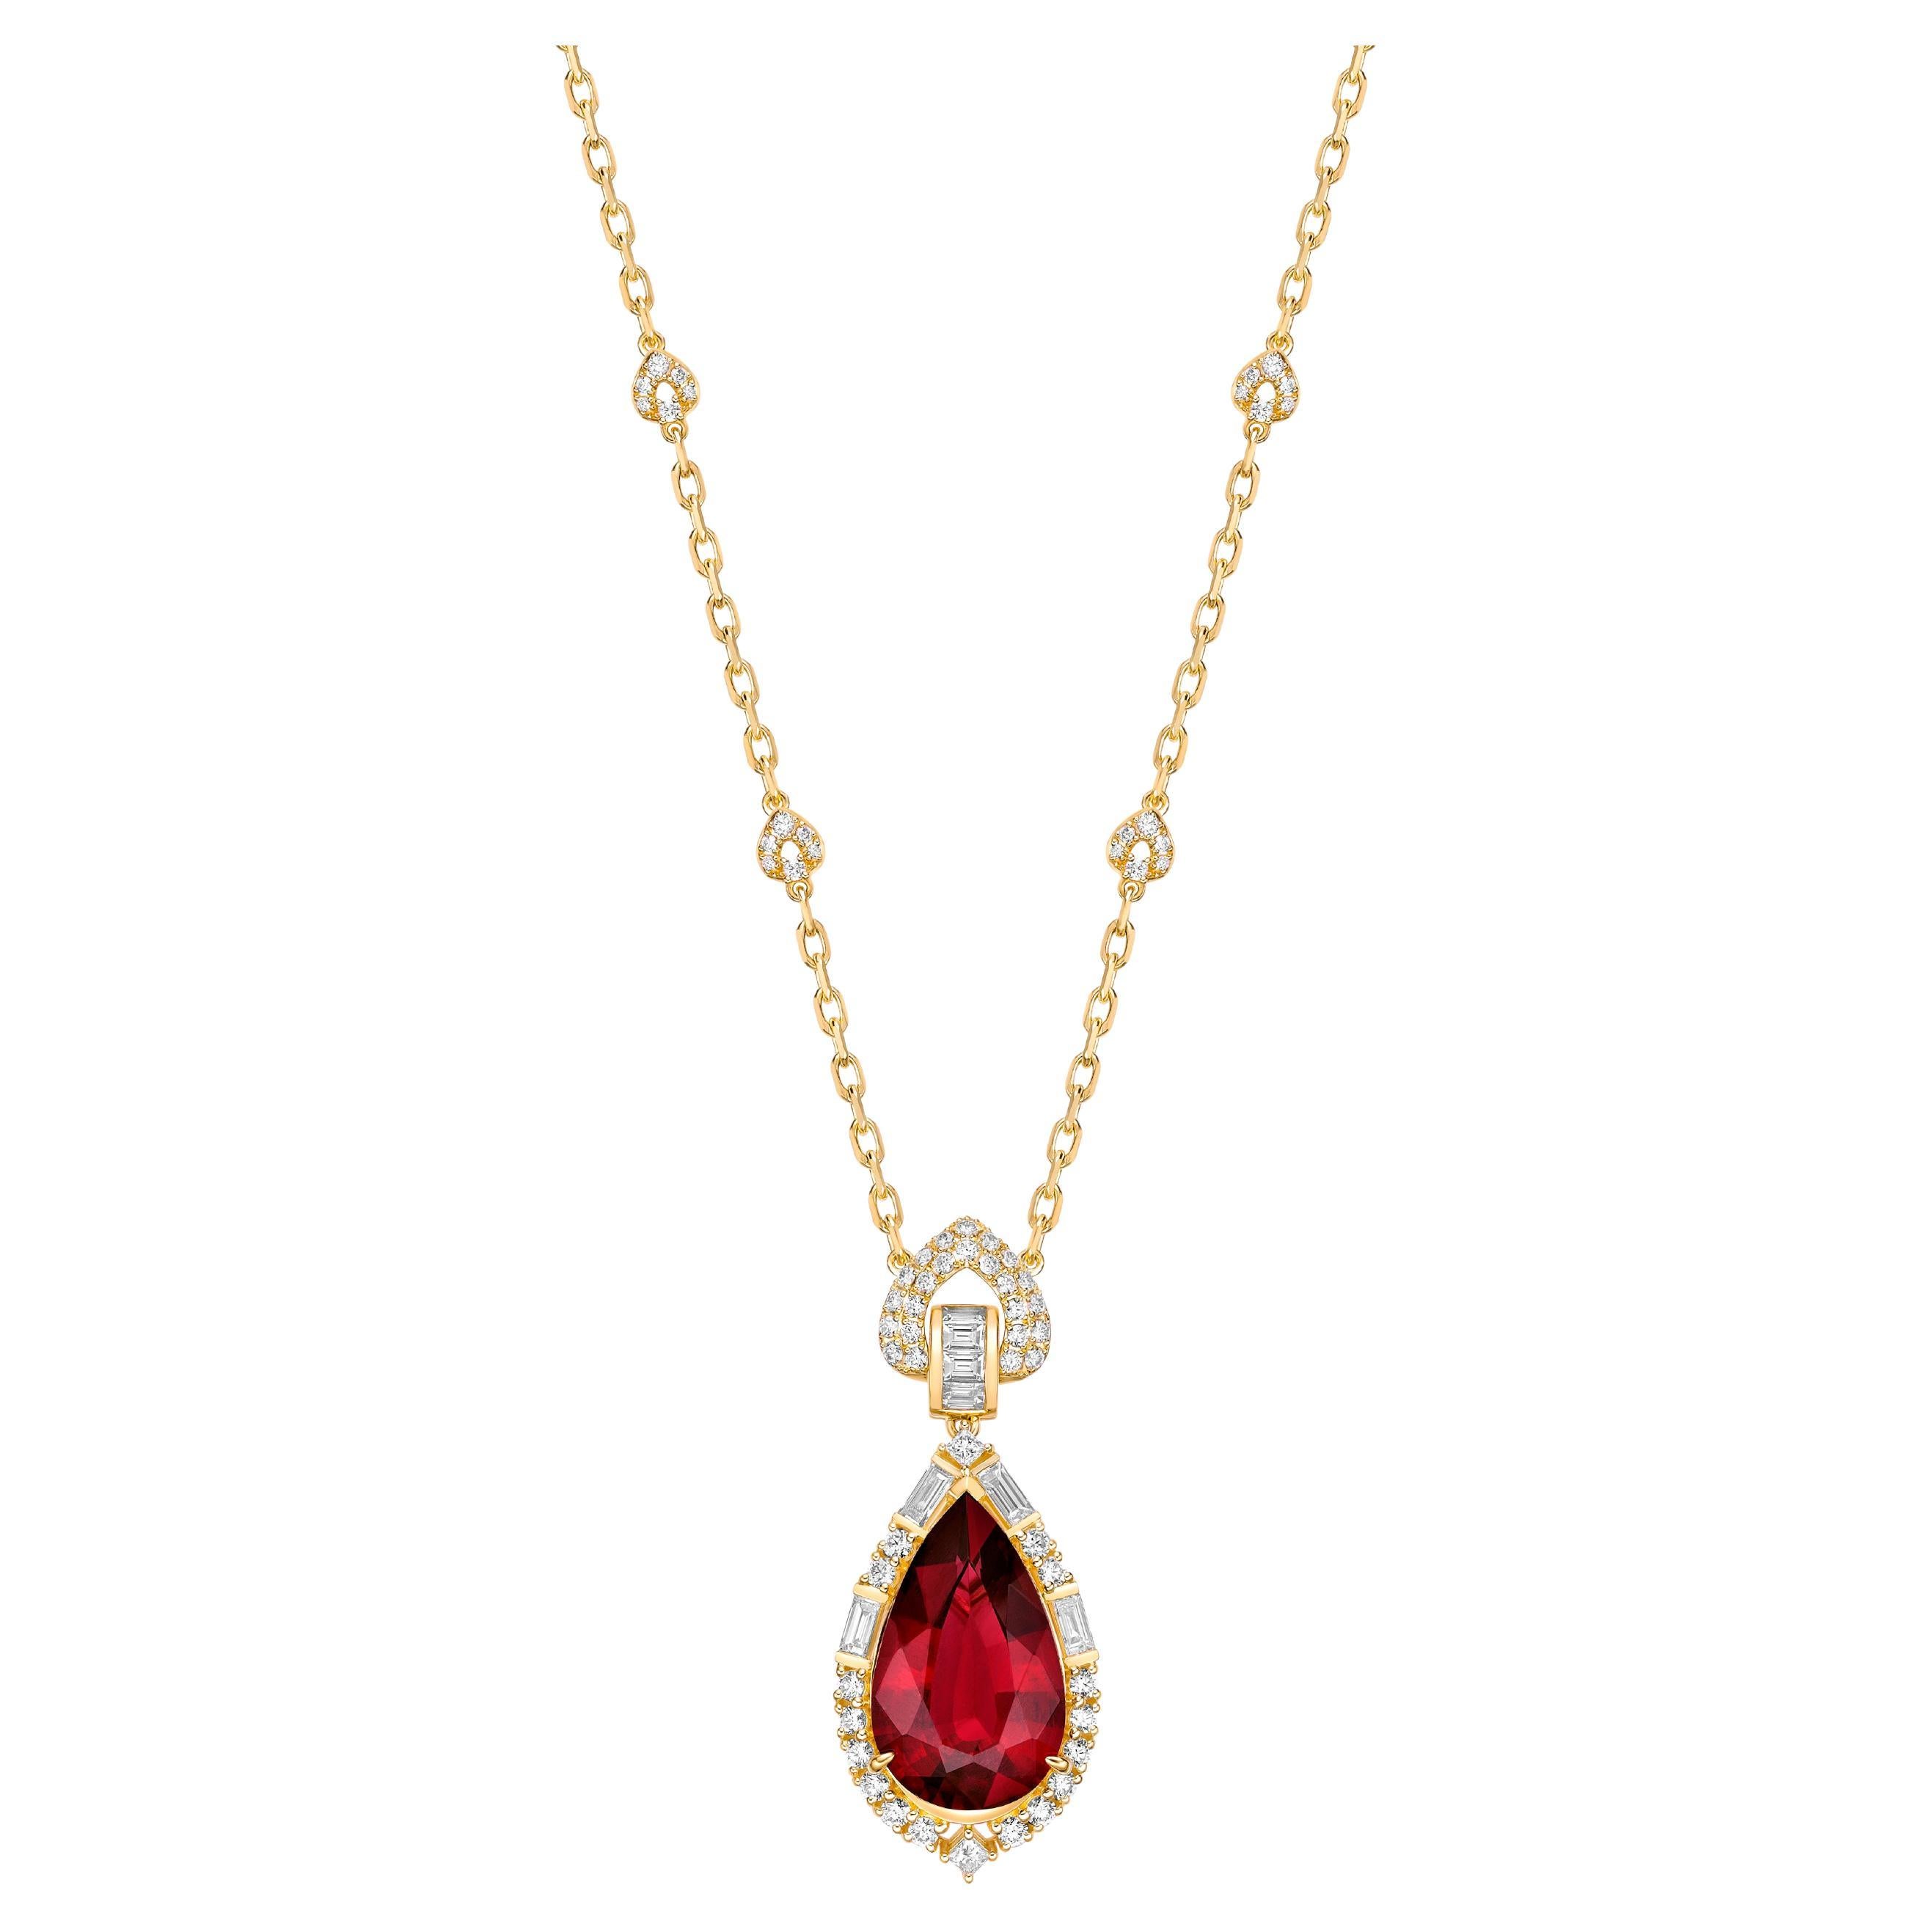 11.72 Carat Rubellite Necklace in 18Karat Yellow Gold with White Diamond For Sale